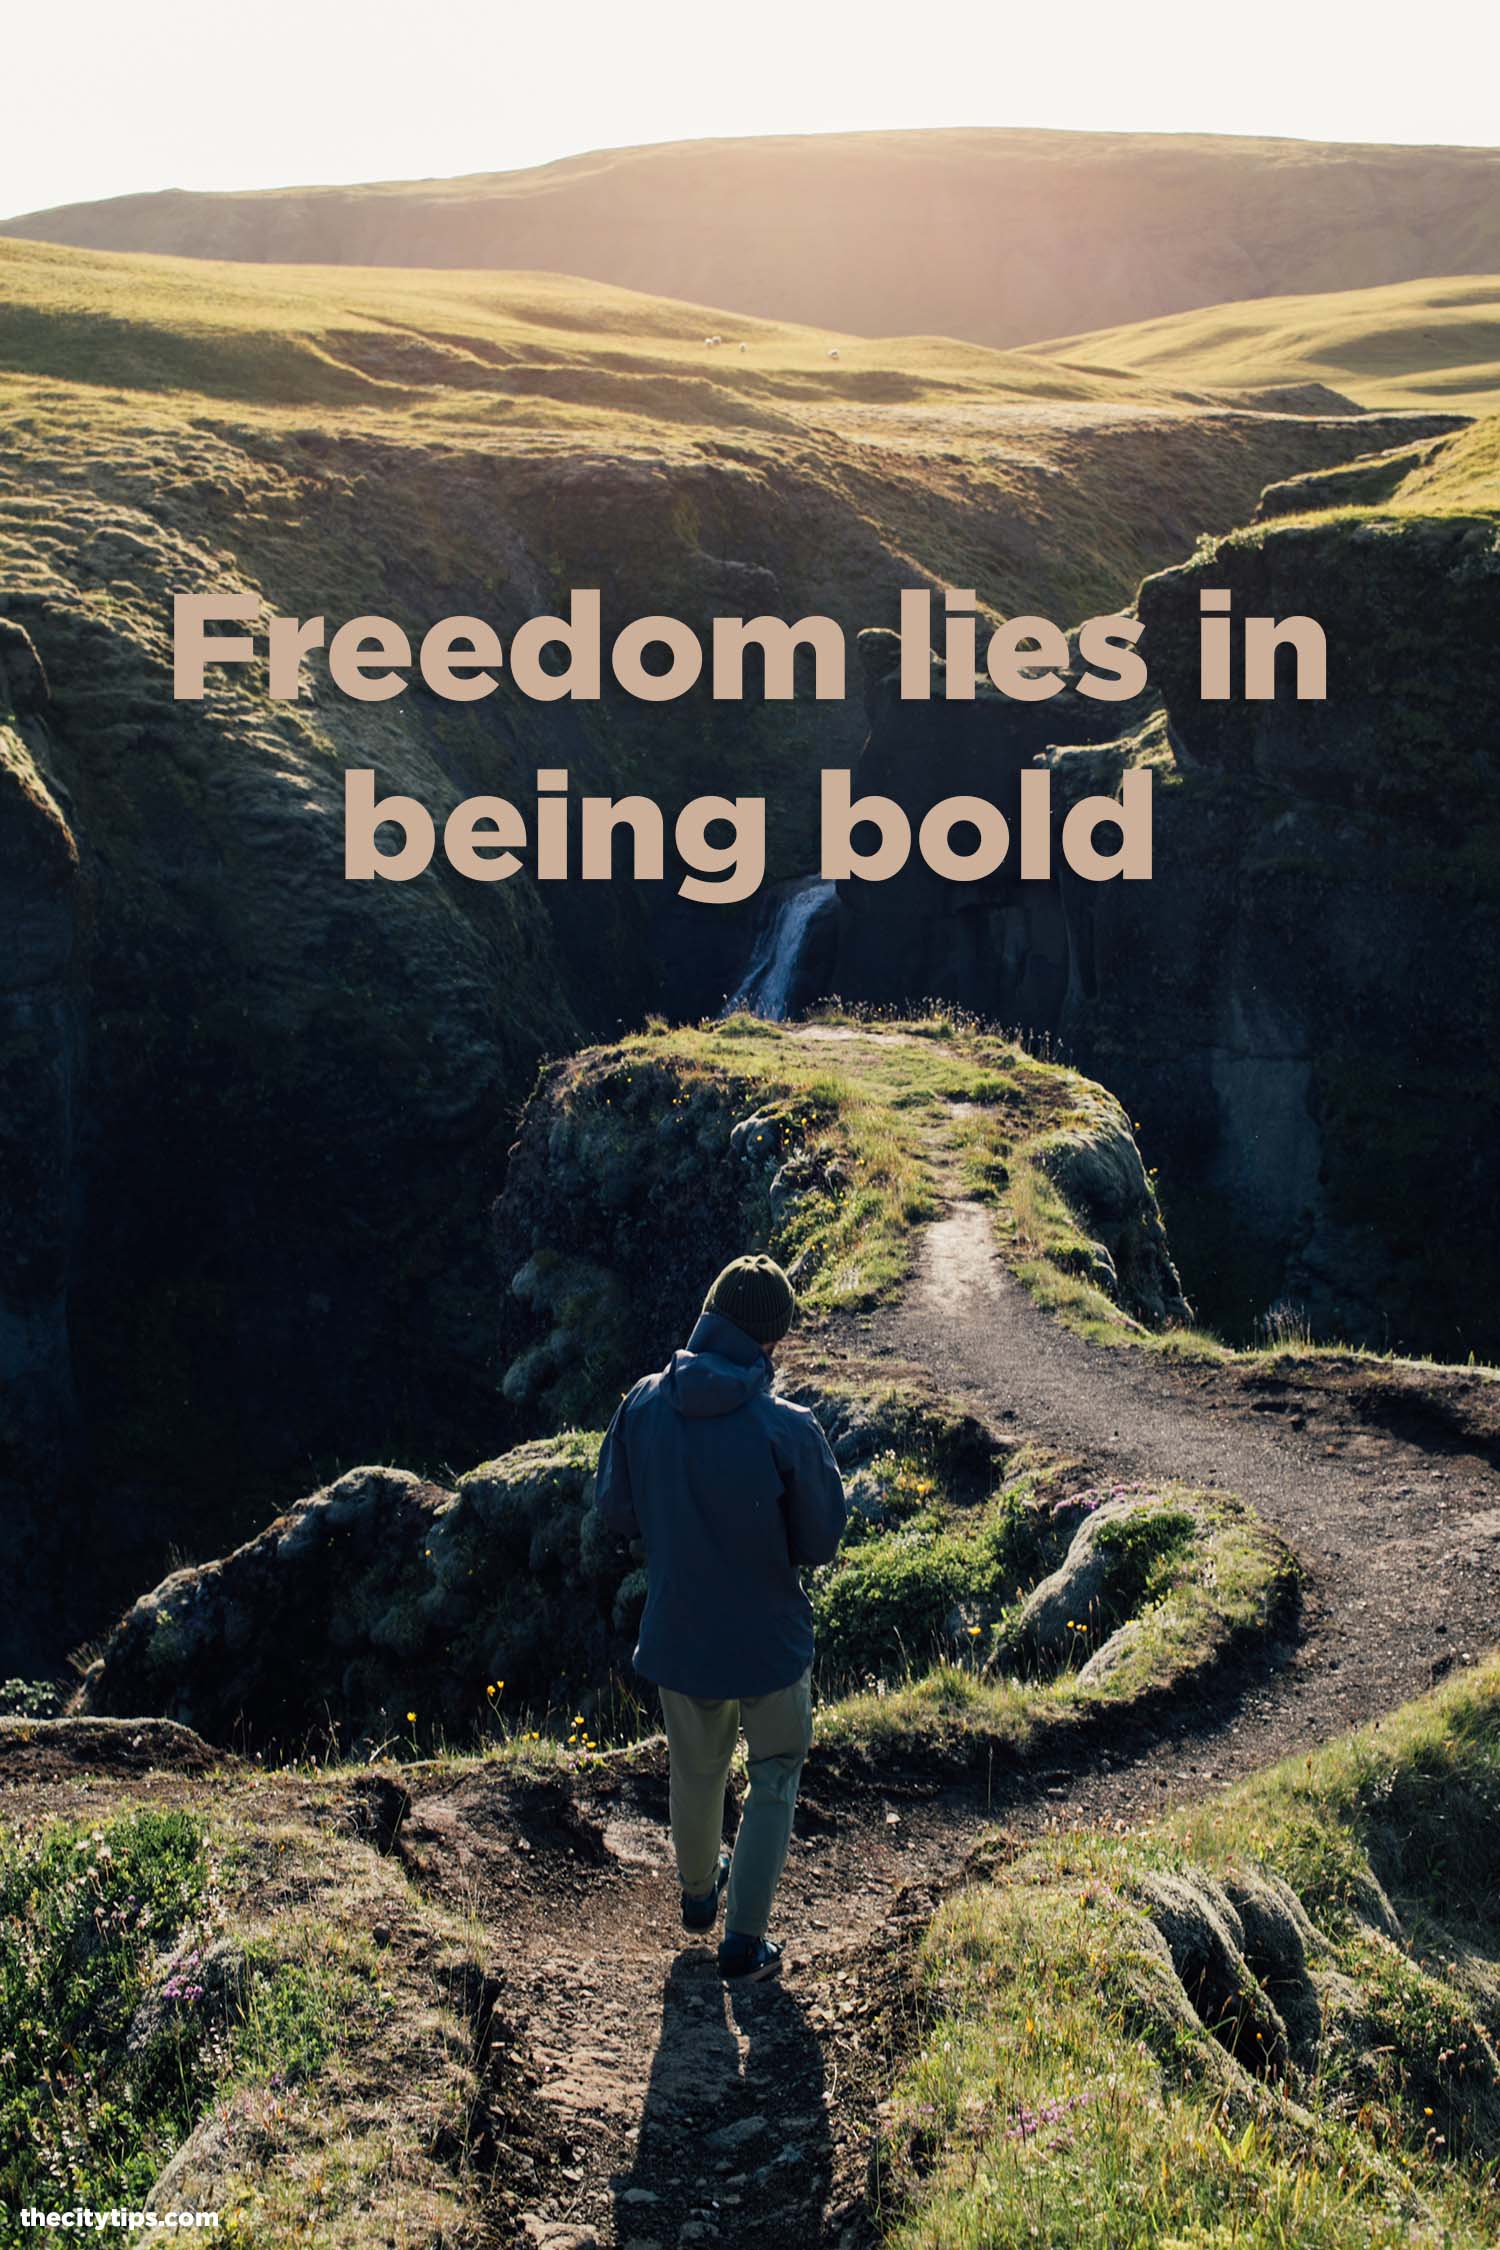 "Freedom lies in being bold." by Robert Frost